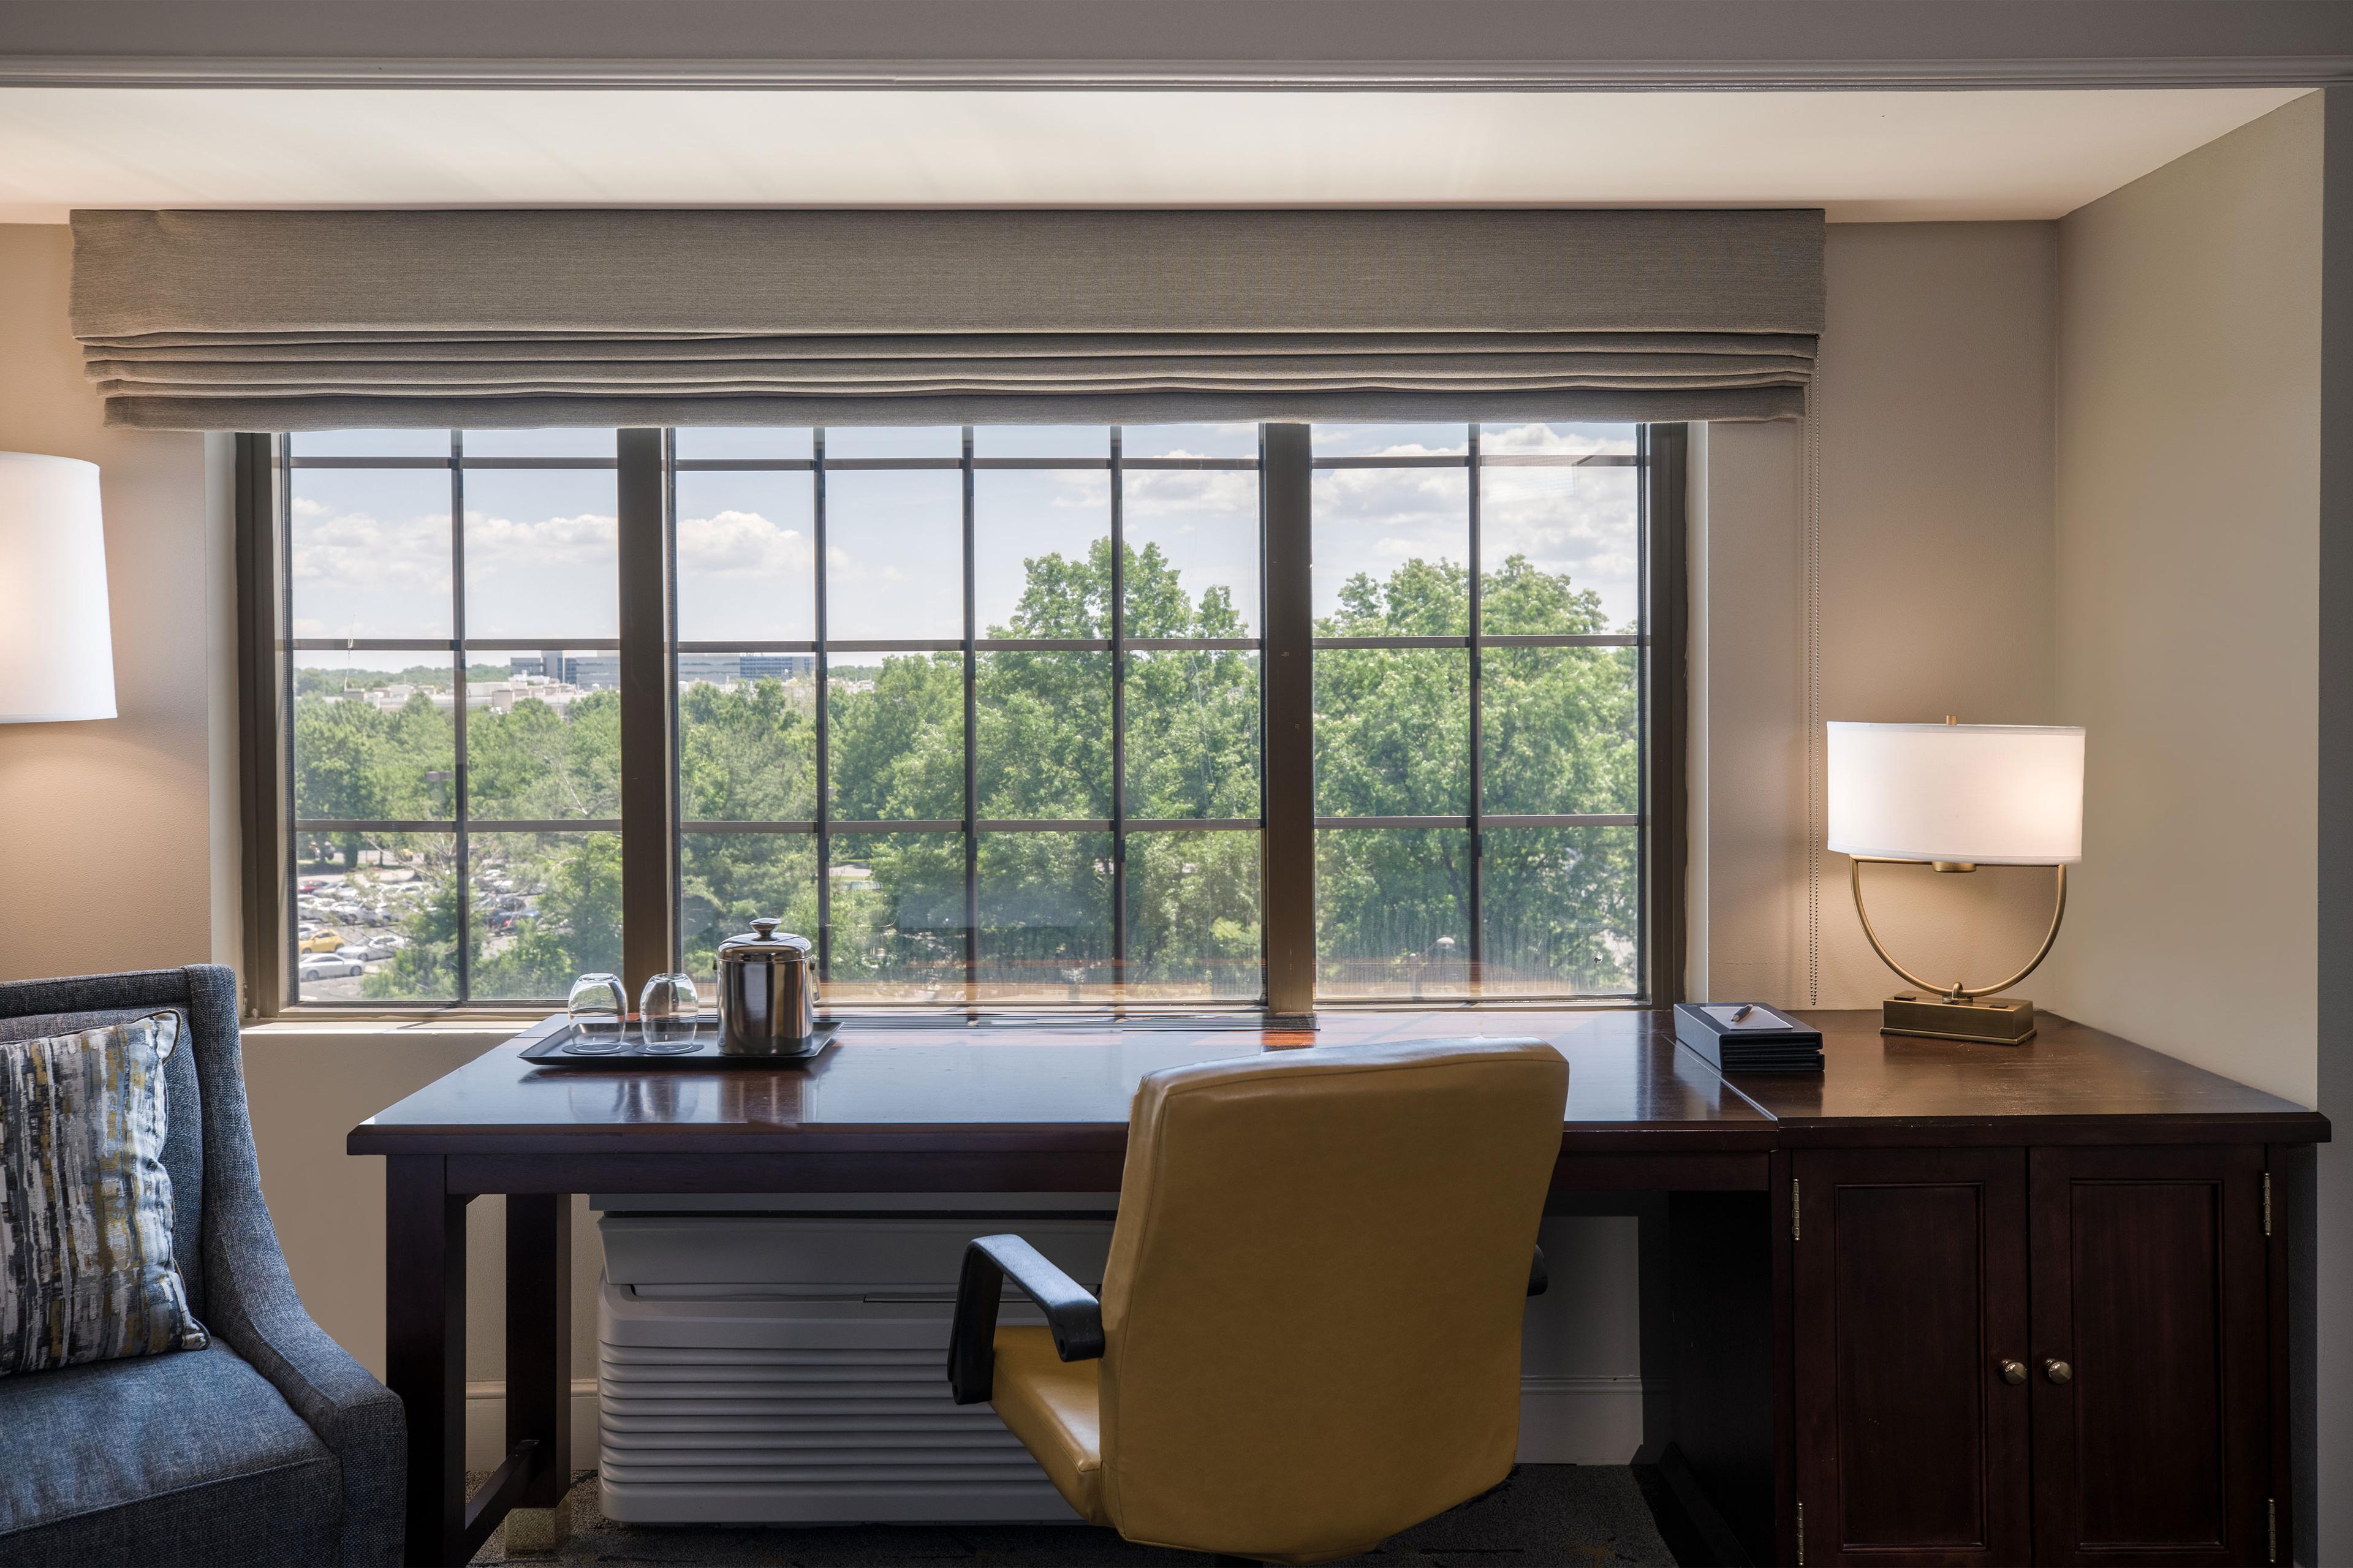 Gaze out the window of your guest room at the scenic landscape of Linthicum Heights from the comfort of our well-appointed accommodations.